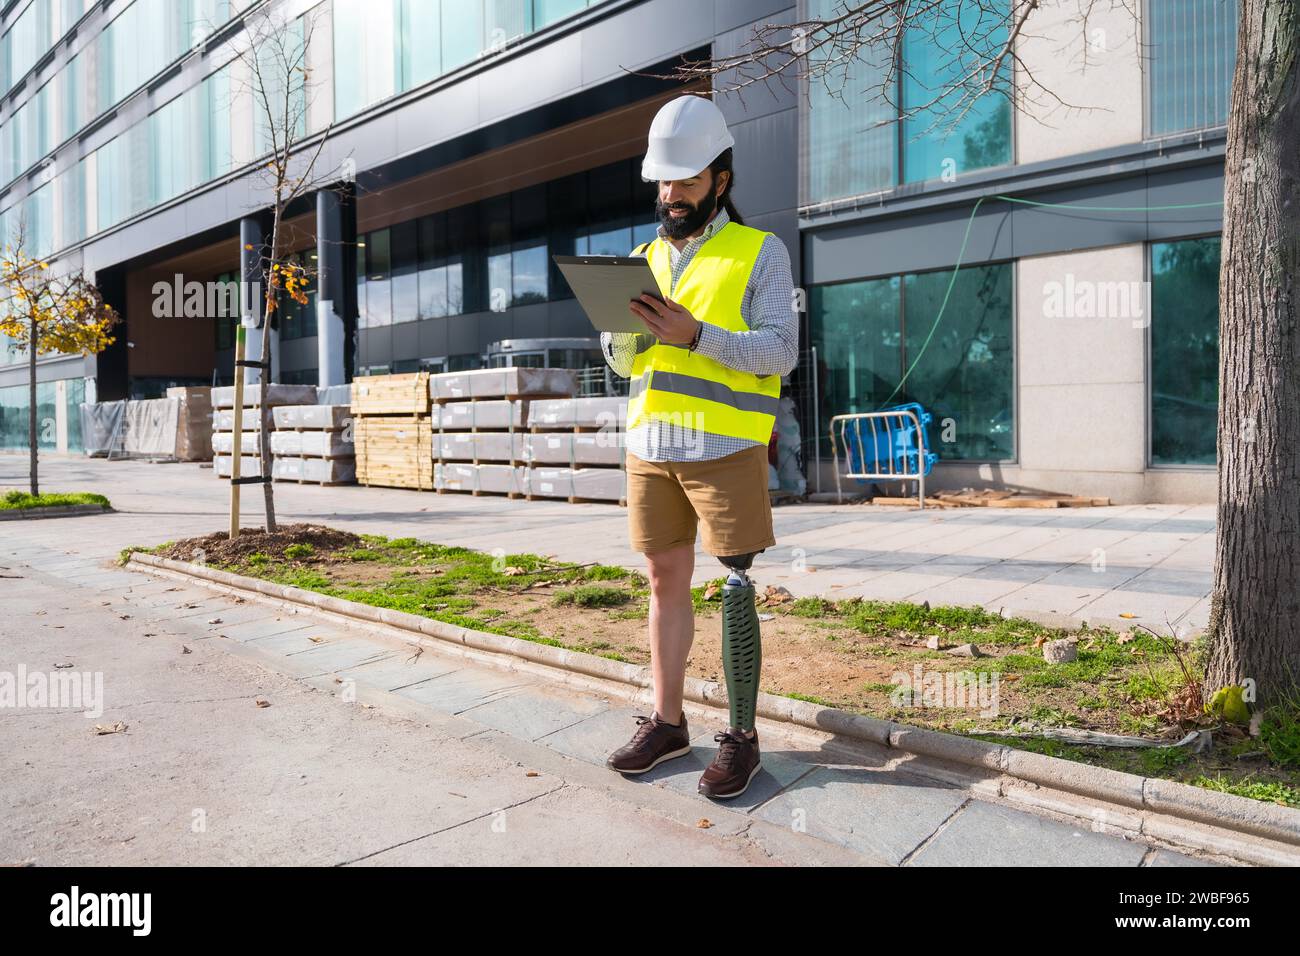 Engineer with prosthetic leg working on construction site wearing protective equipment Stock Photo